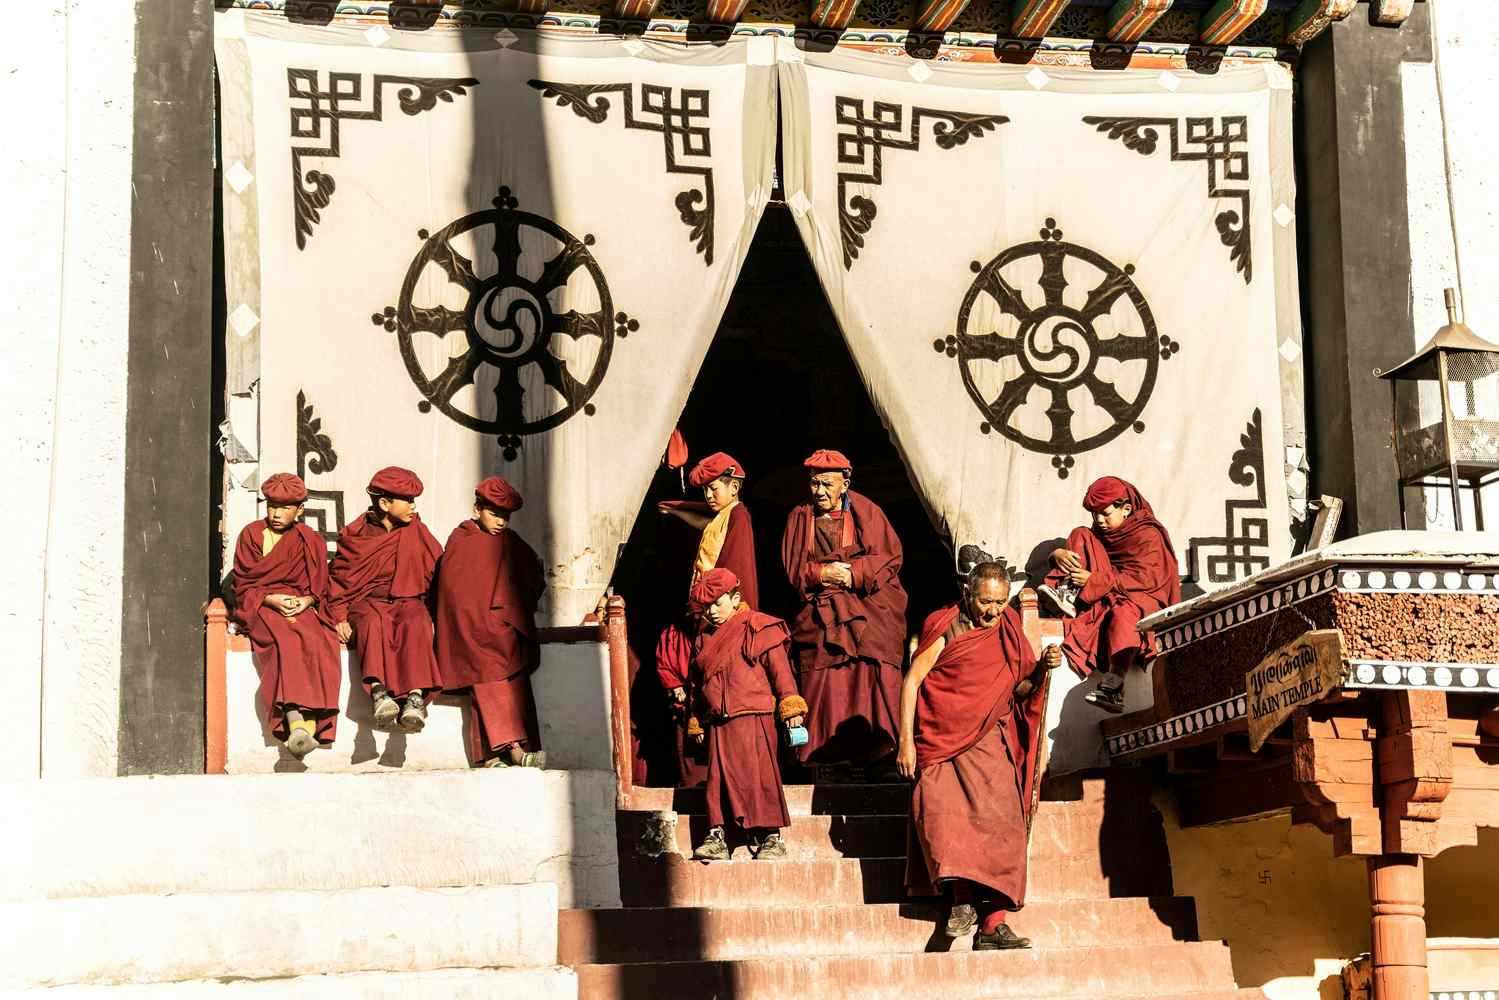 Red-robed Buddist monks descending stairs outside the Hemis Monastery in Ladakh, India